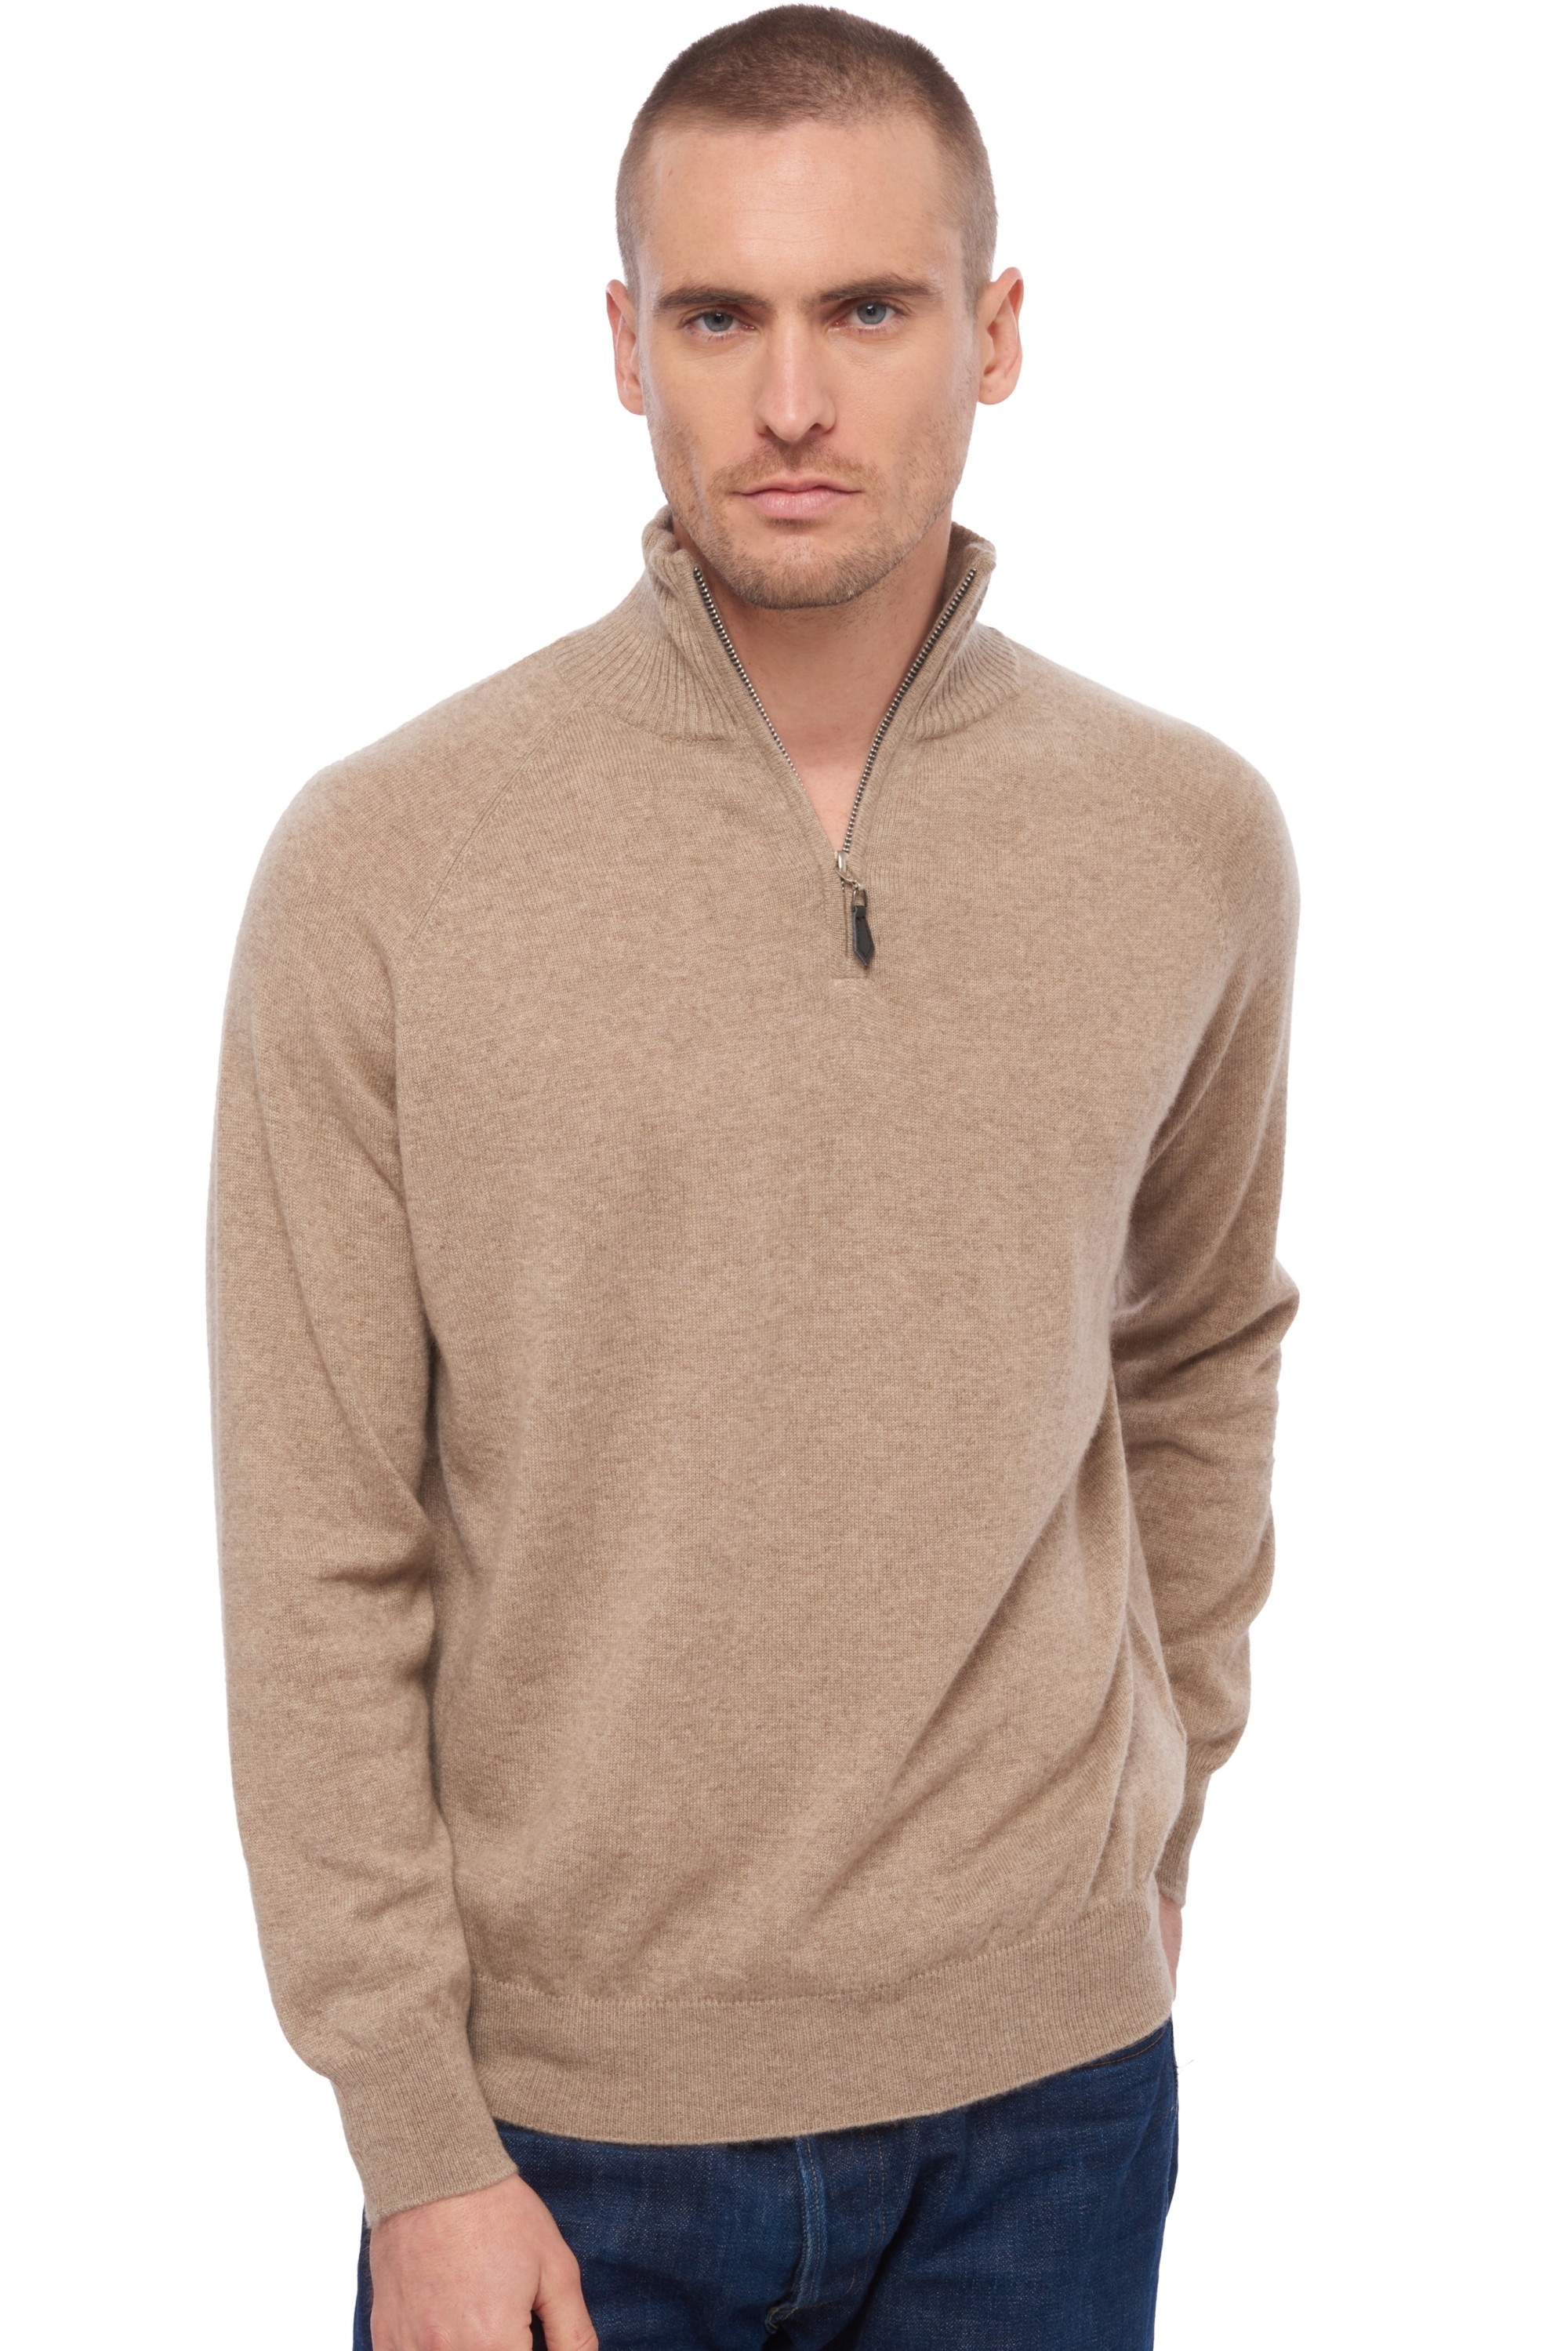 Cachemire pull homme natural vez natural brown xl